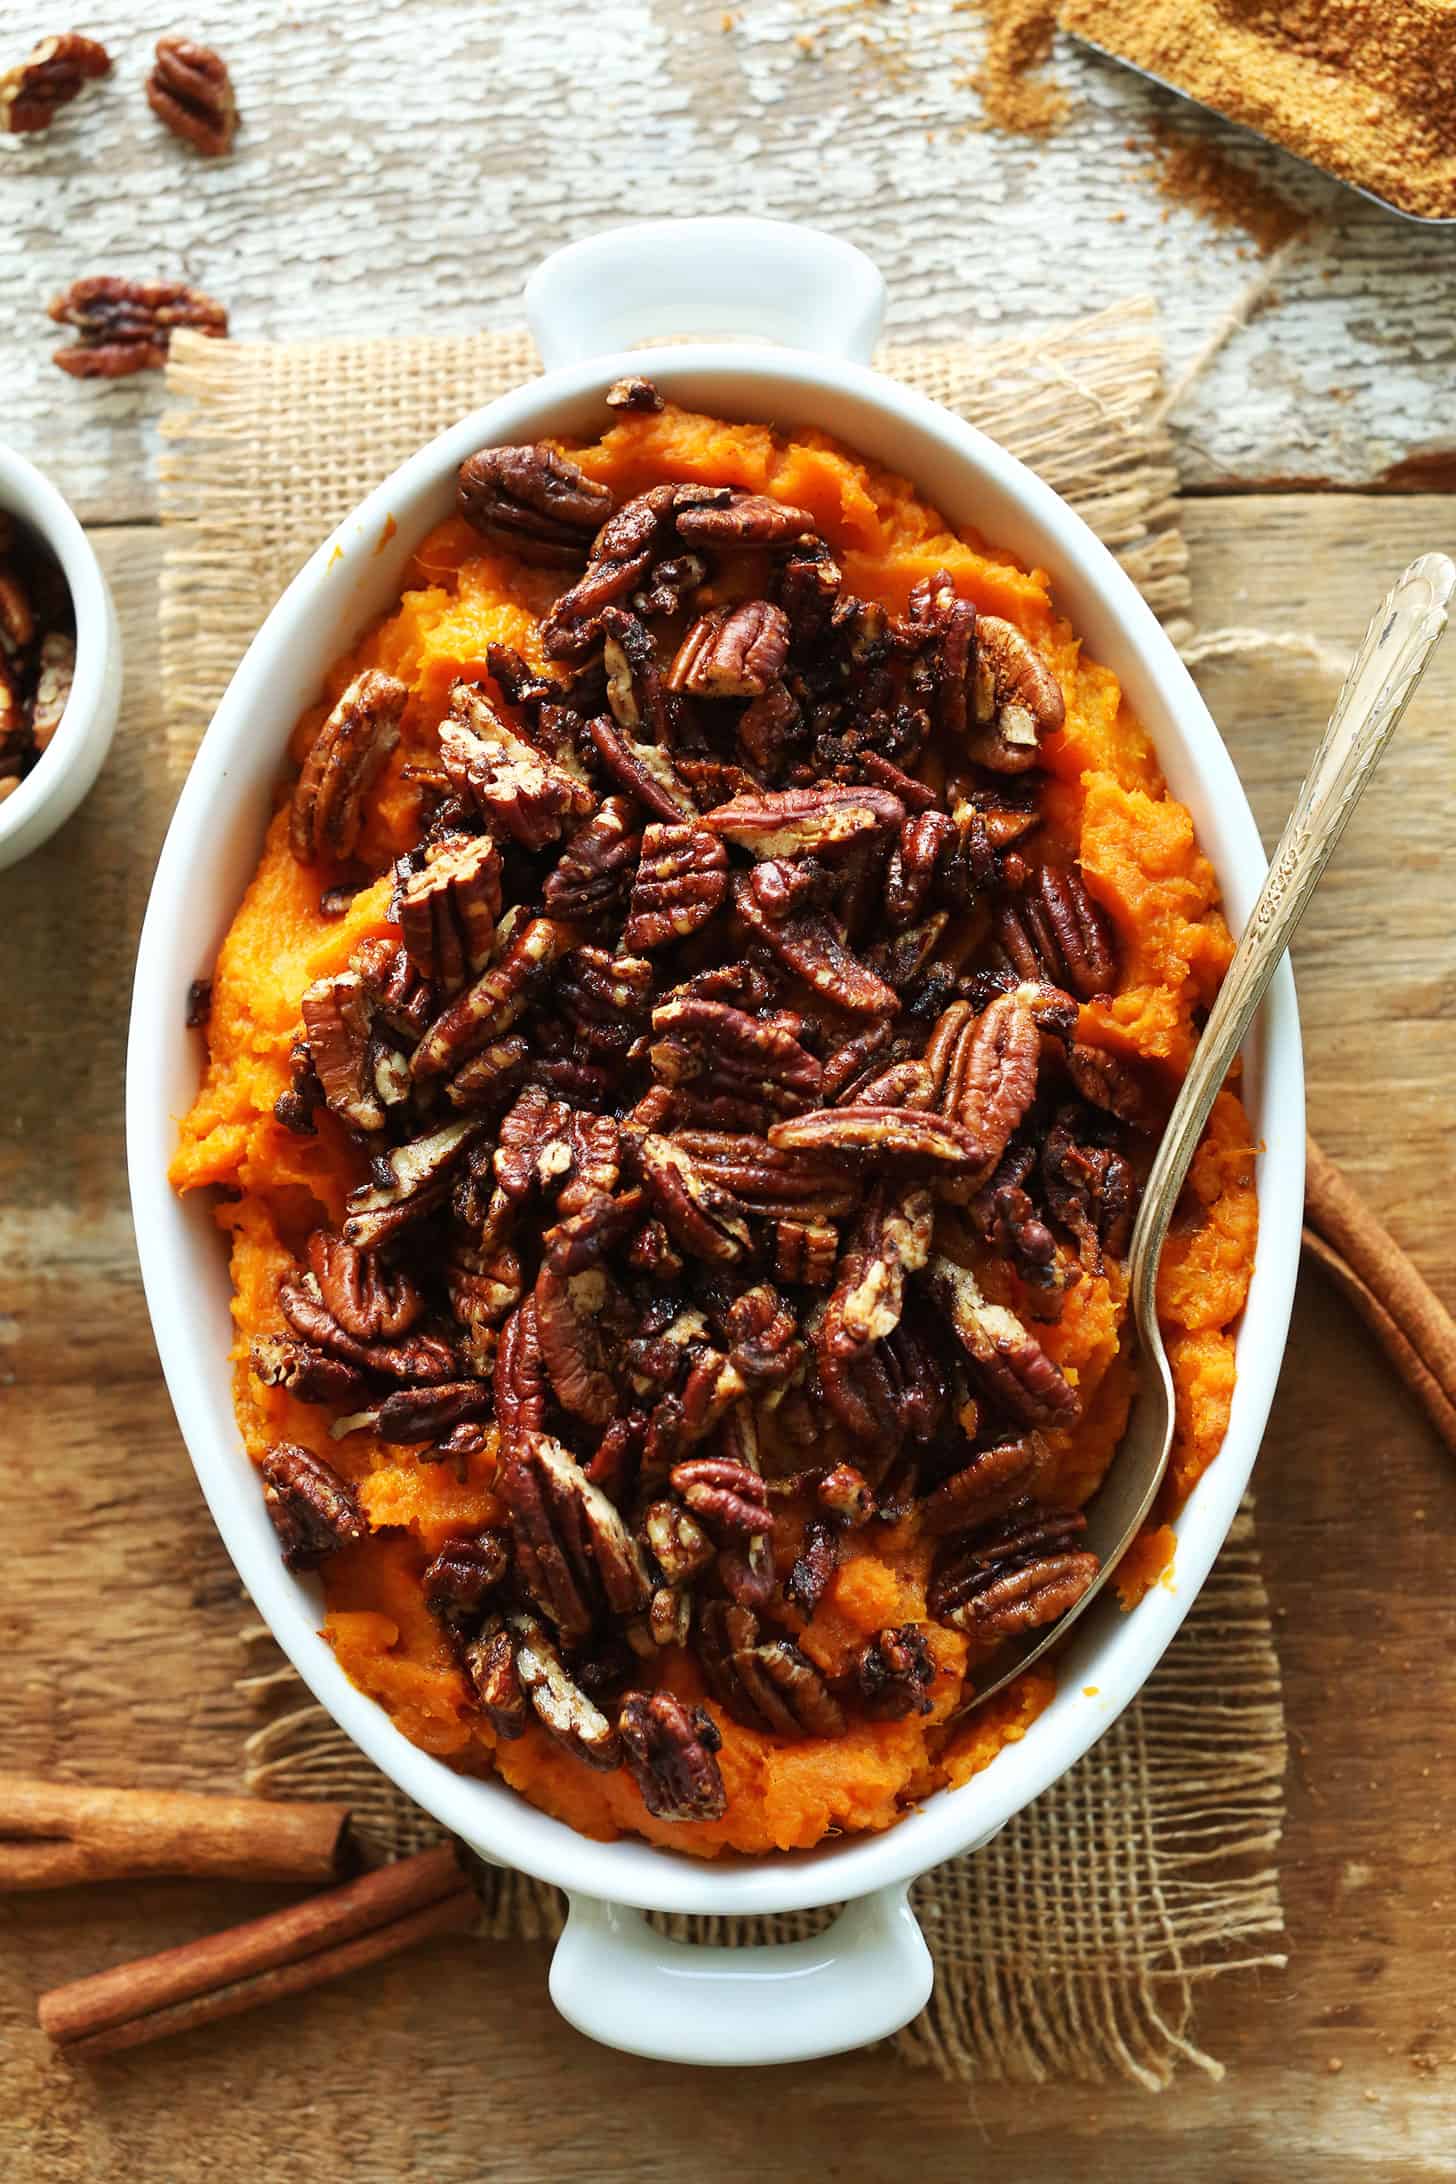 Butternut squash sweet potato casserole topped with pecans